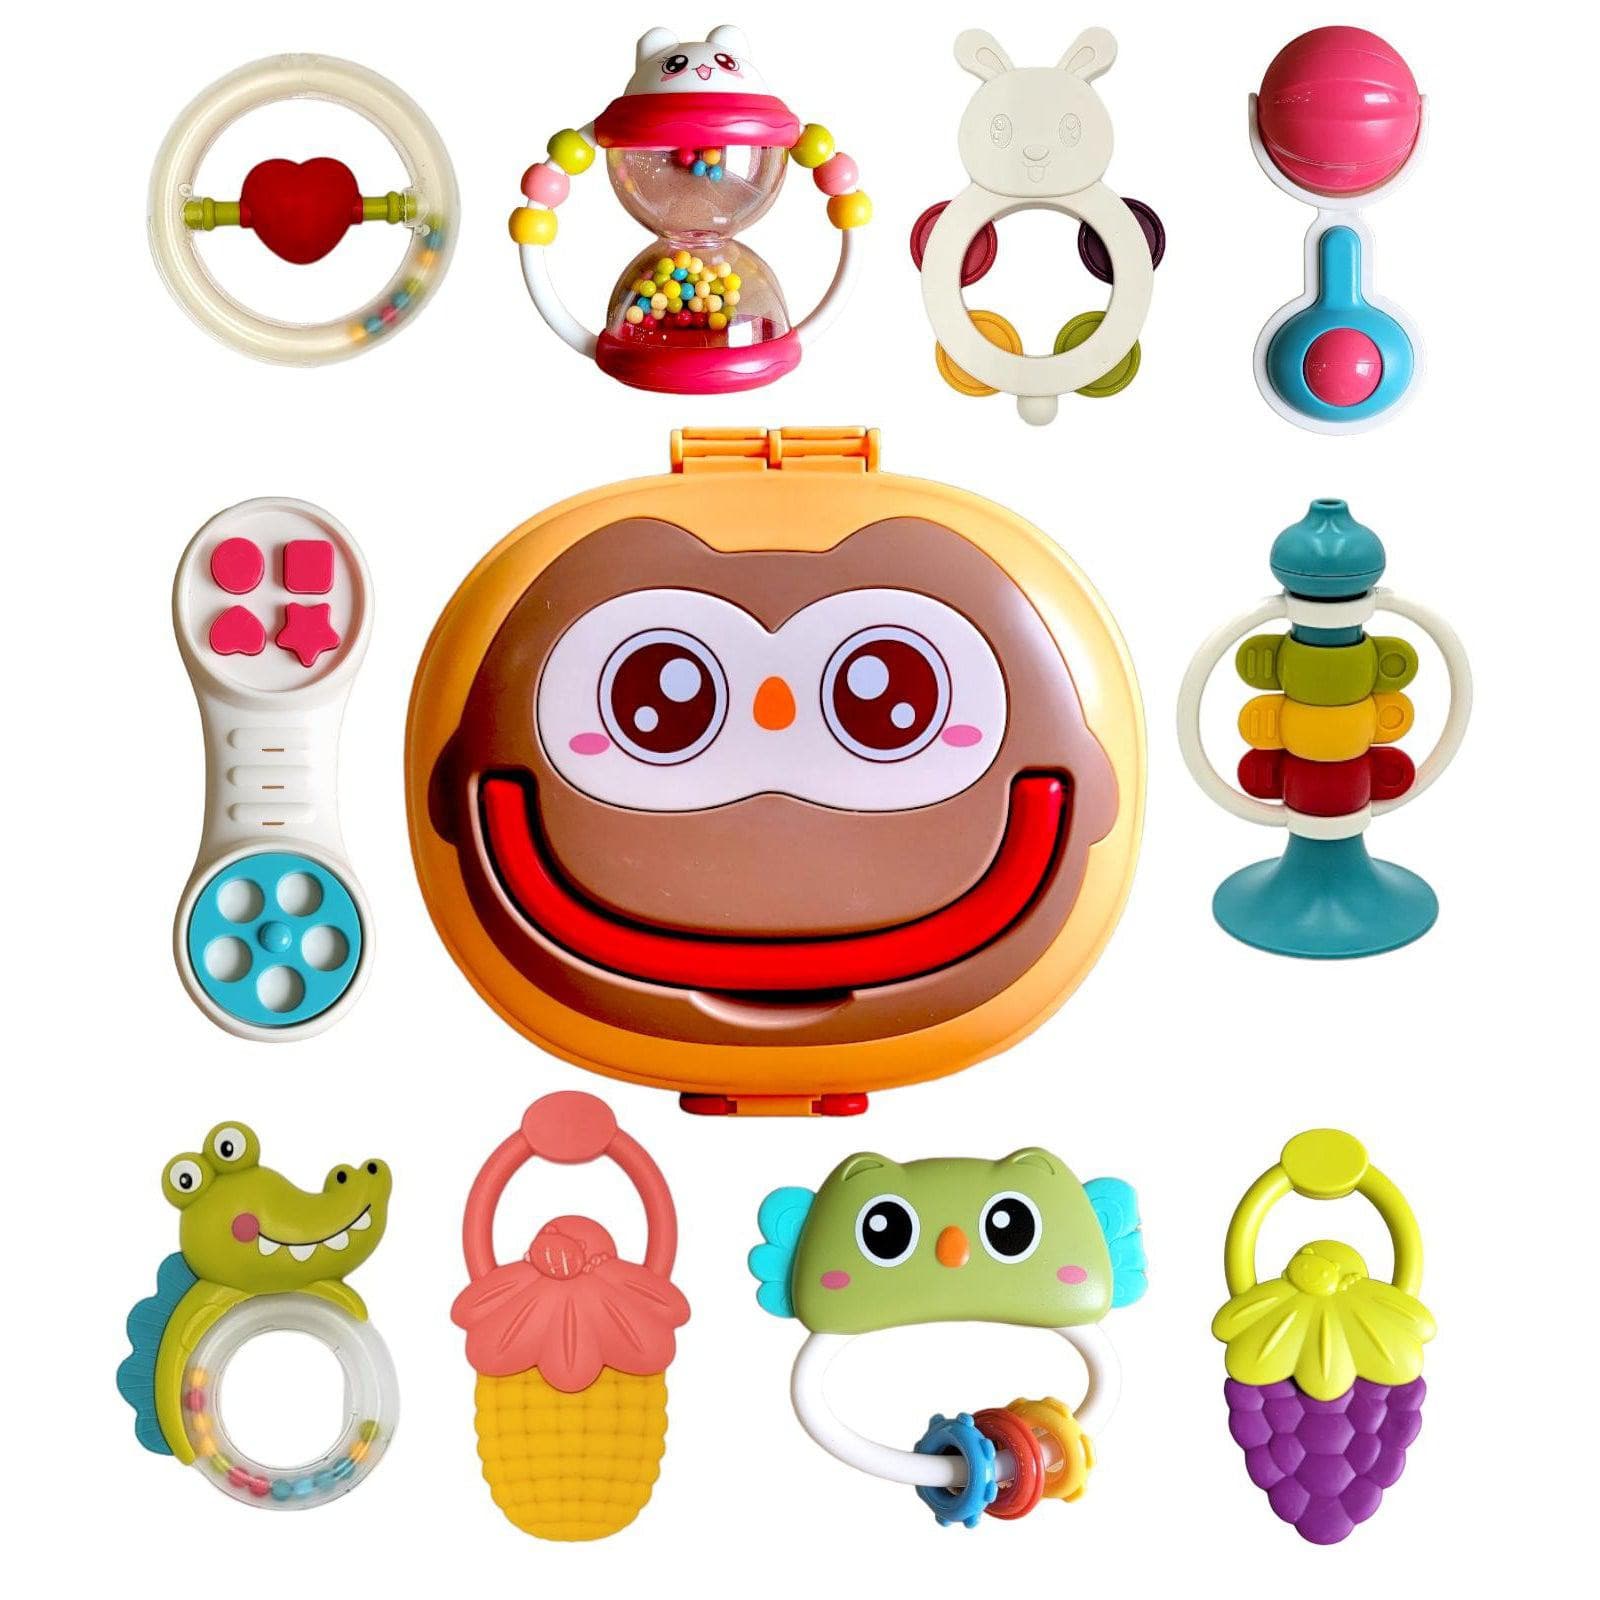 Baby Rattle Toy Teether Set 10 PCS With Storage Box Non-Toxic Material